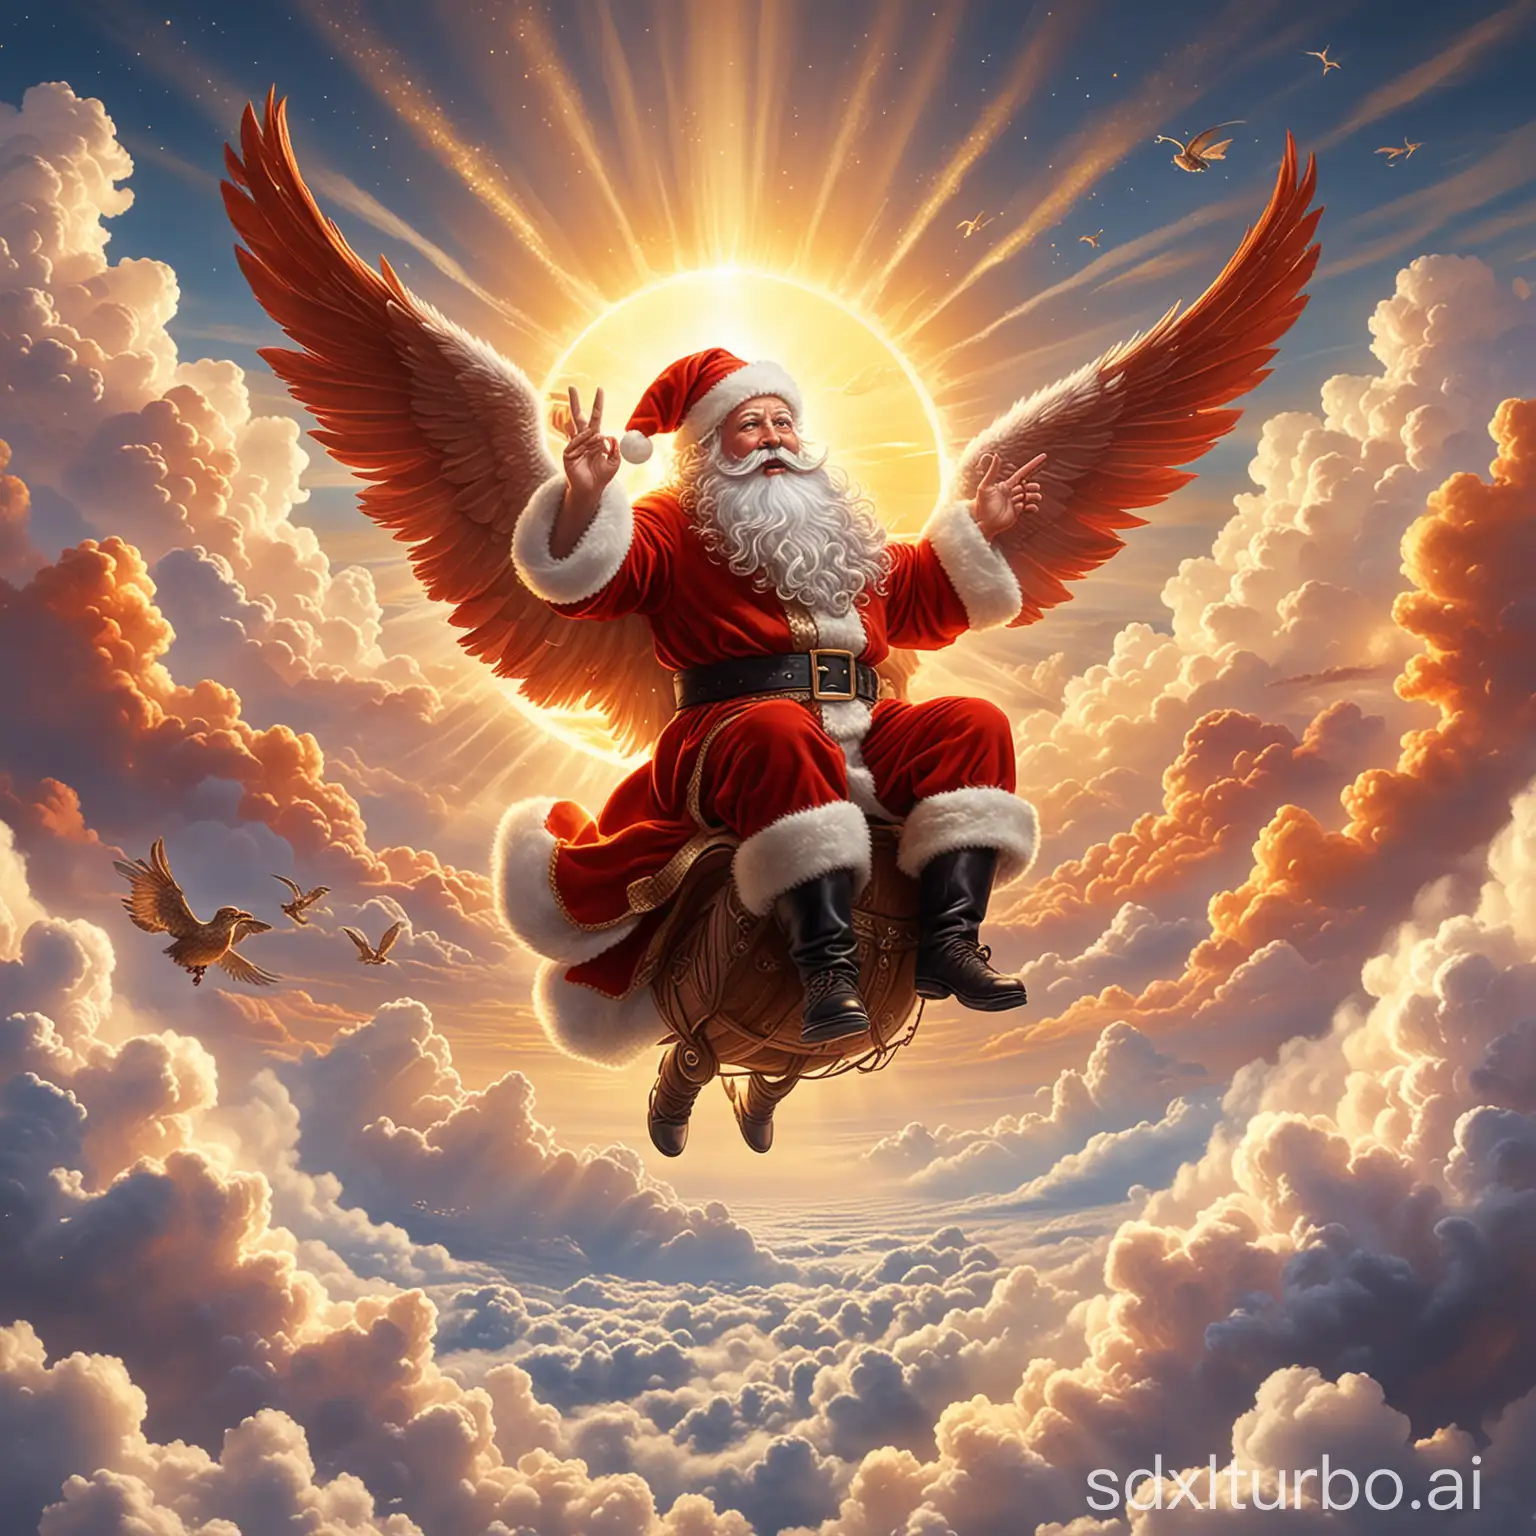 A scene in which Santa Claus rides on a sparkling sun phoenix, carrying him high above the clouds, while the sun rises above them, filling the world with its warm light.